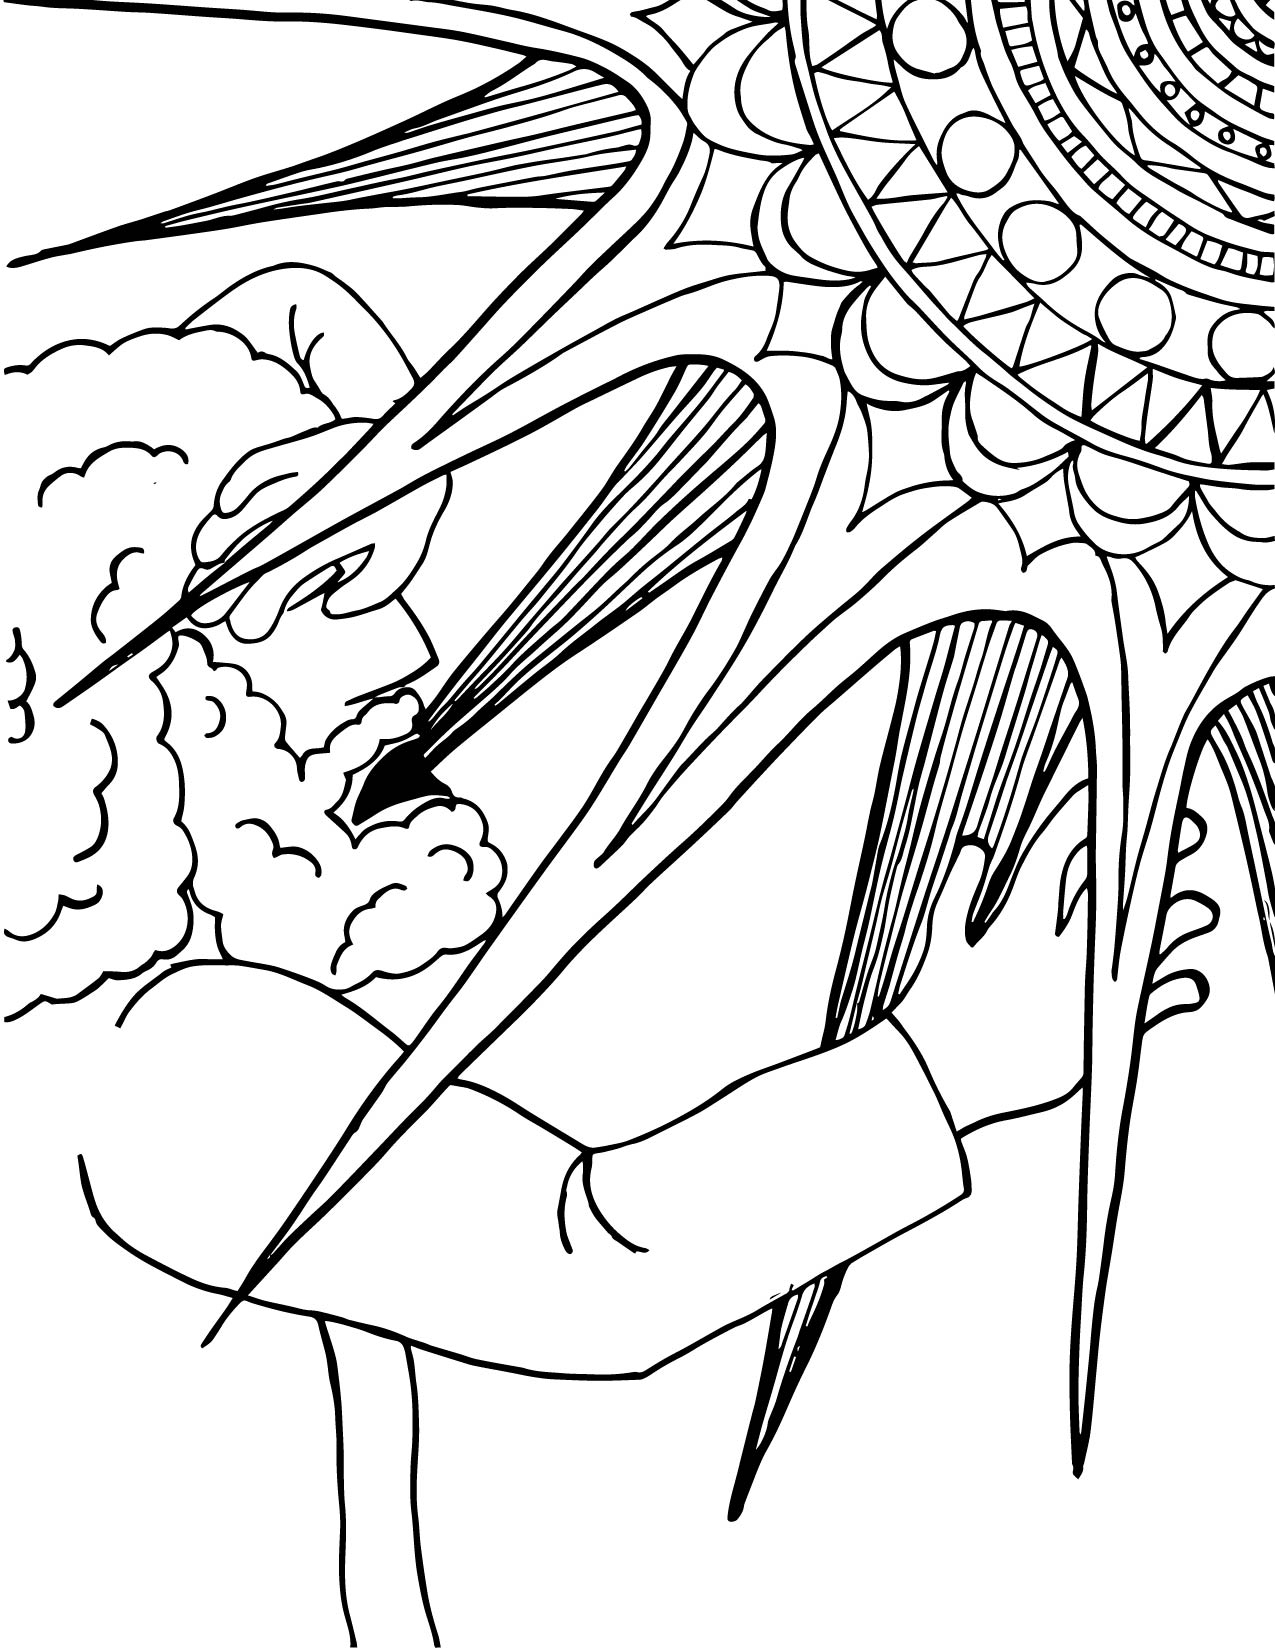 St Augustine Coloring Page Conversion Of Saint Paul Coloring Page 01 The Homely Hours